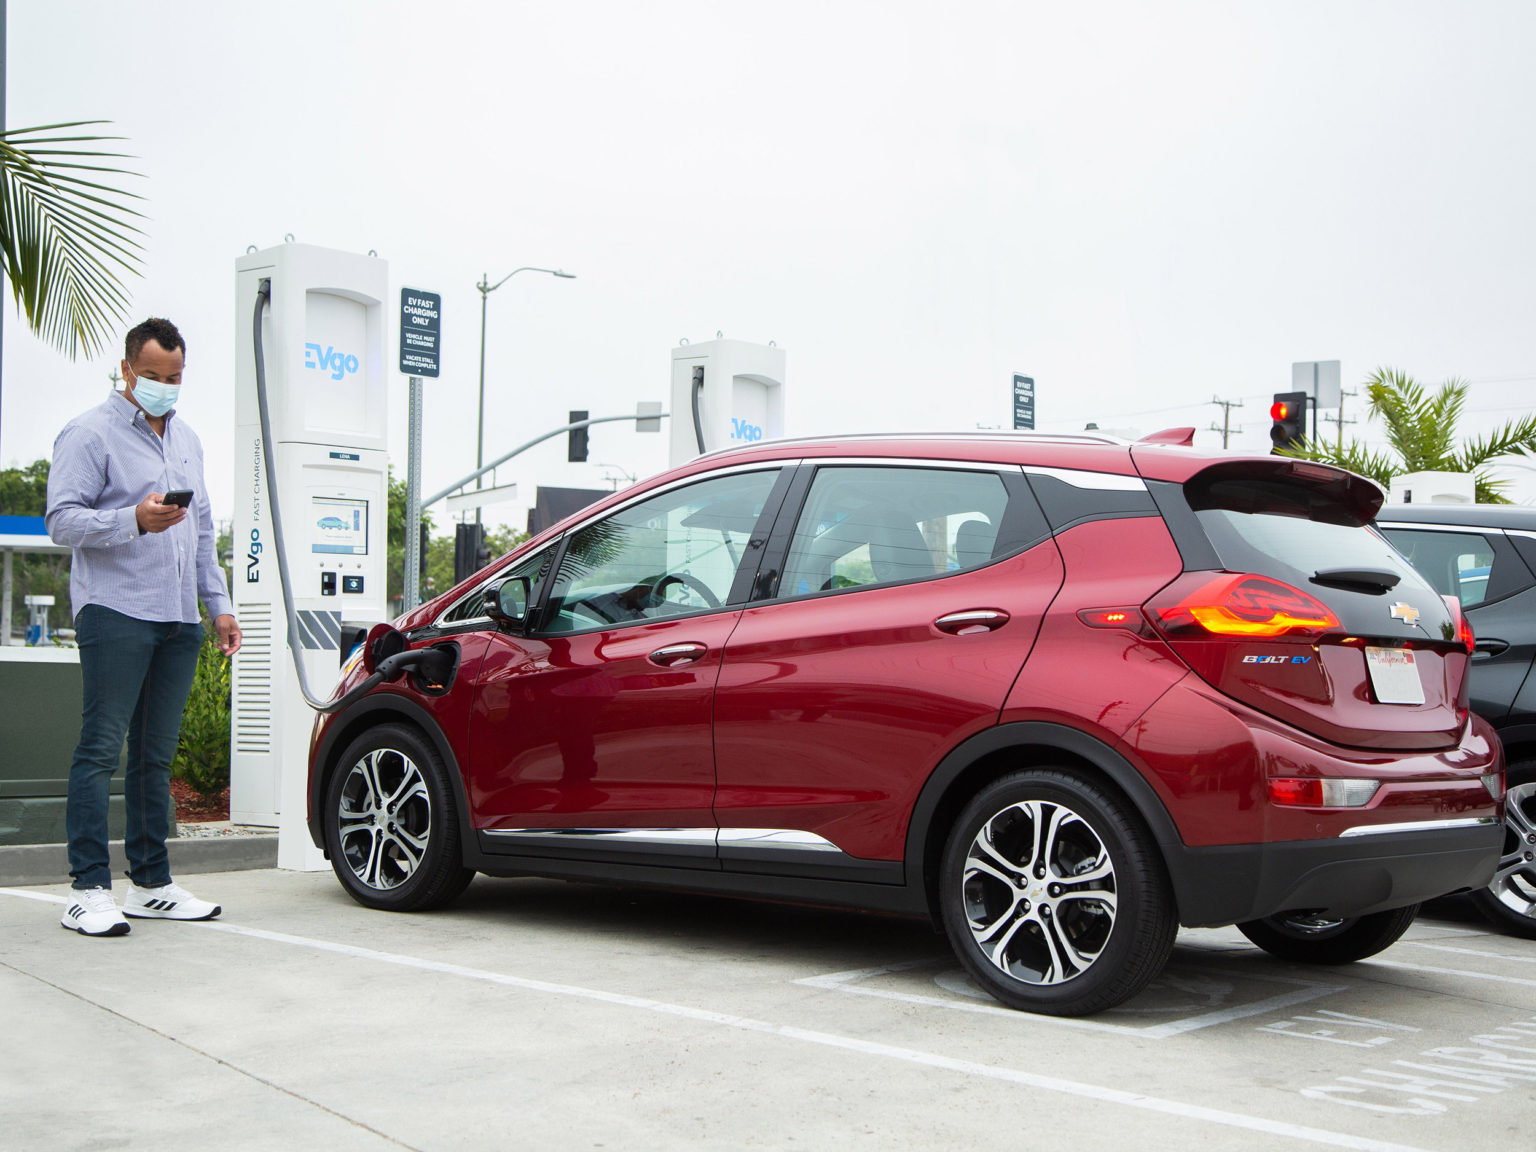 General Motors is investing heavily in EV charging infrastructure while preparing to launch its next-generation electric vehicle fleet.